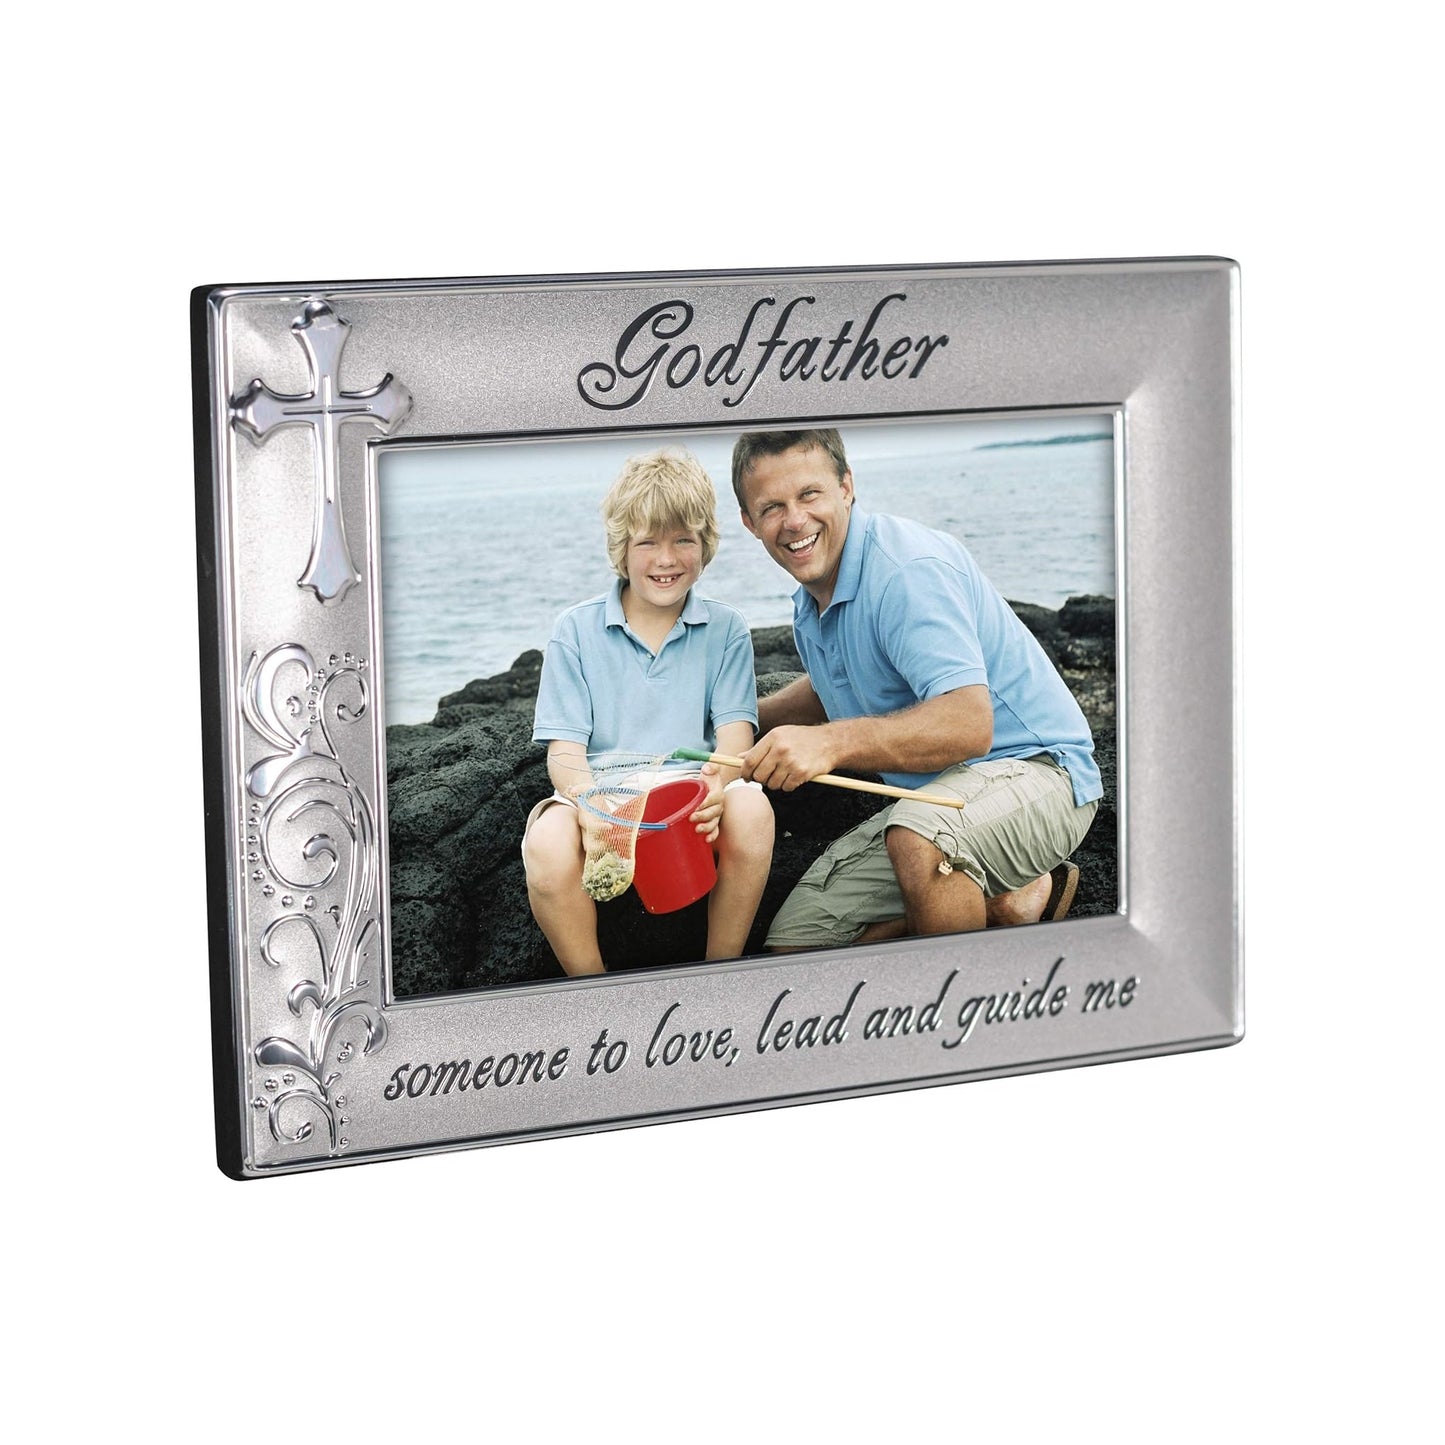 Malden Godfather with Cross Picture Frame Silver